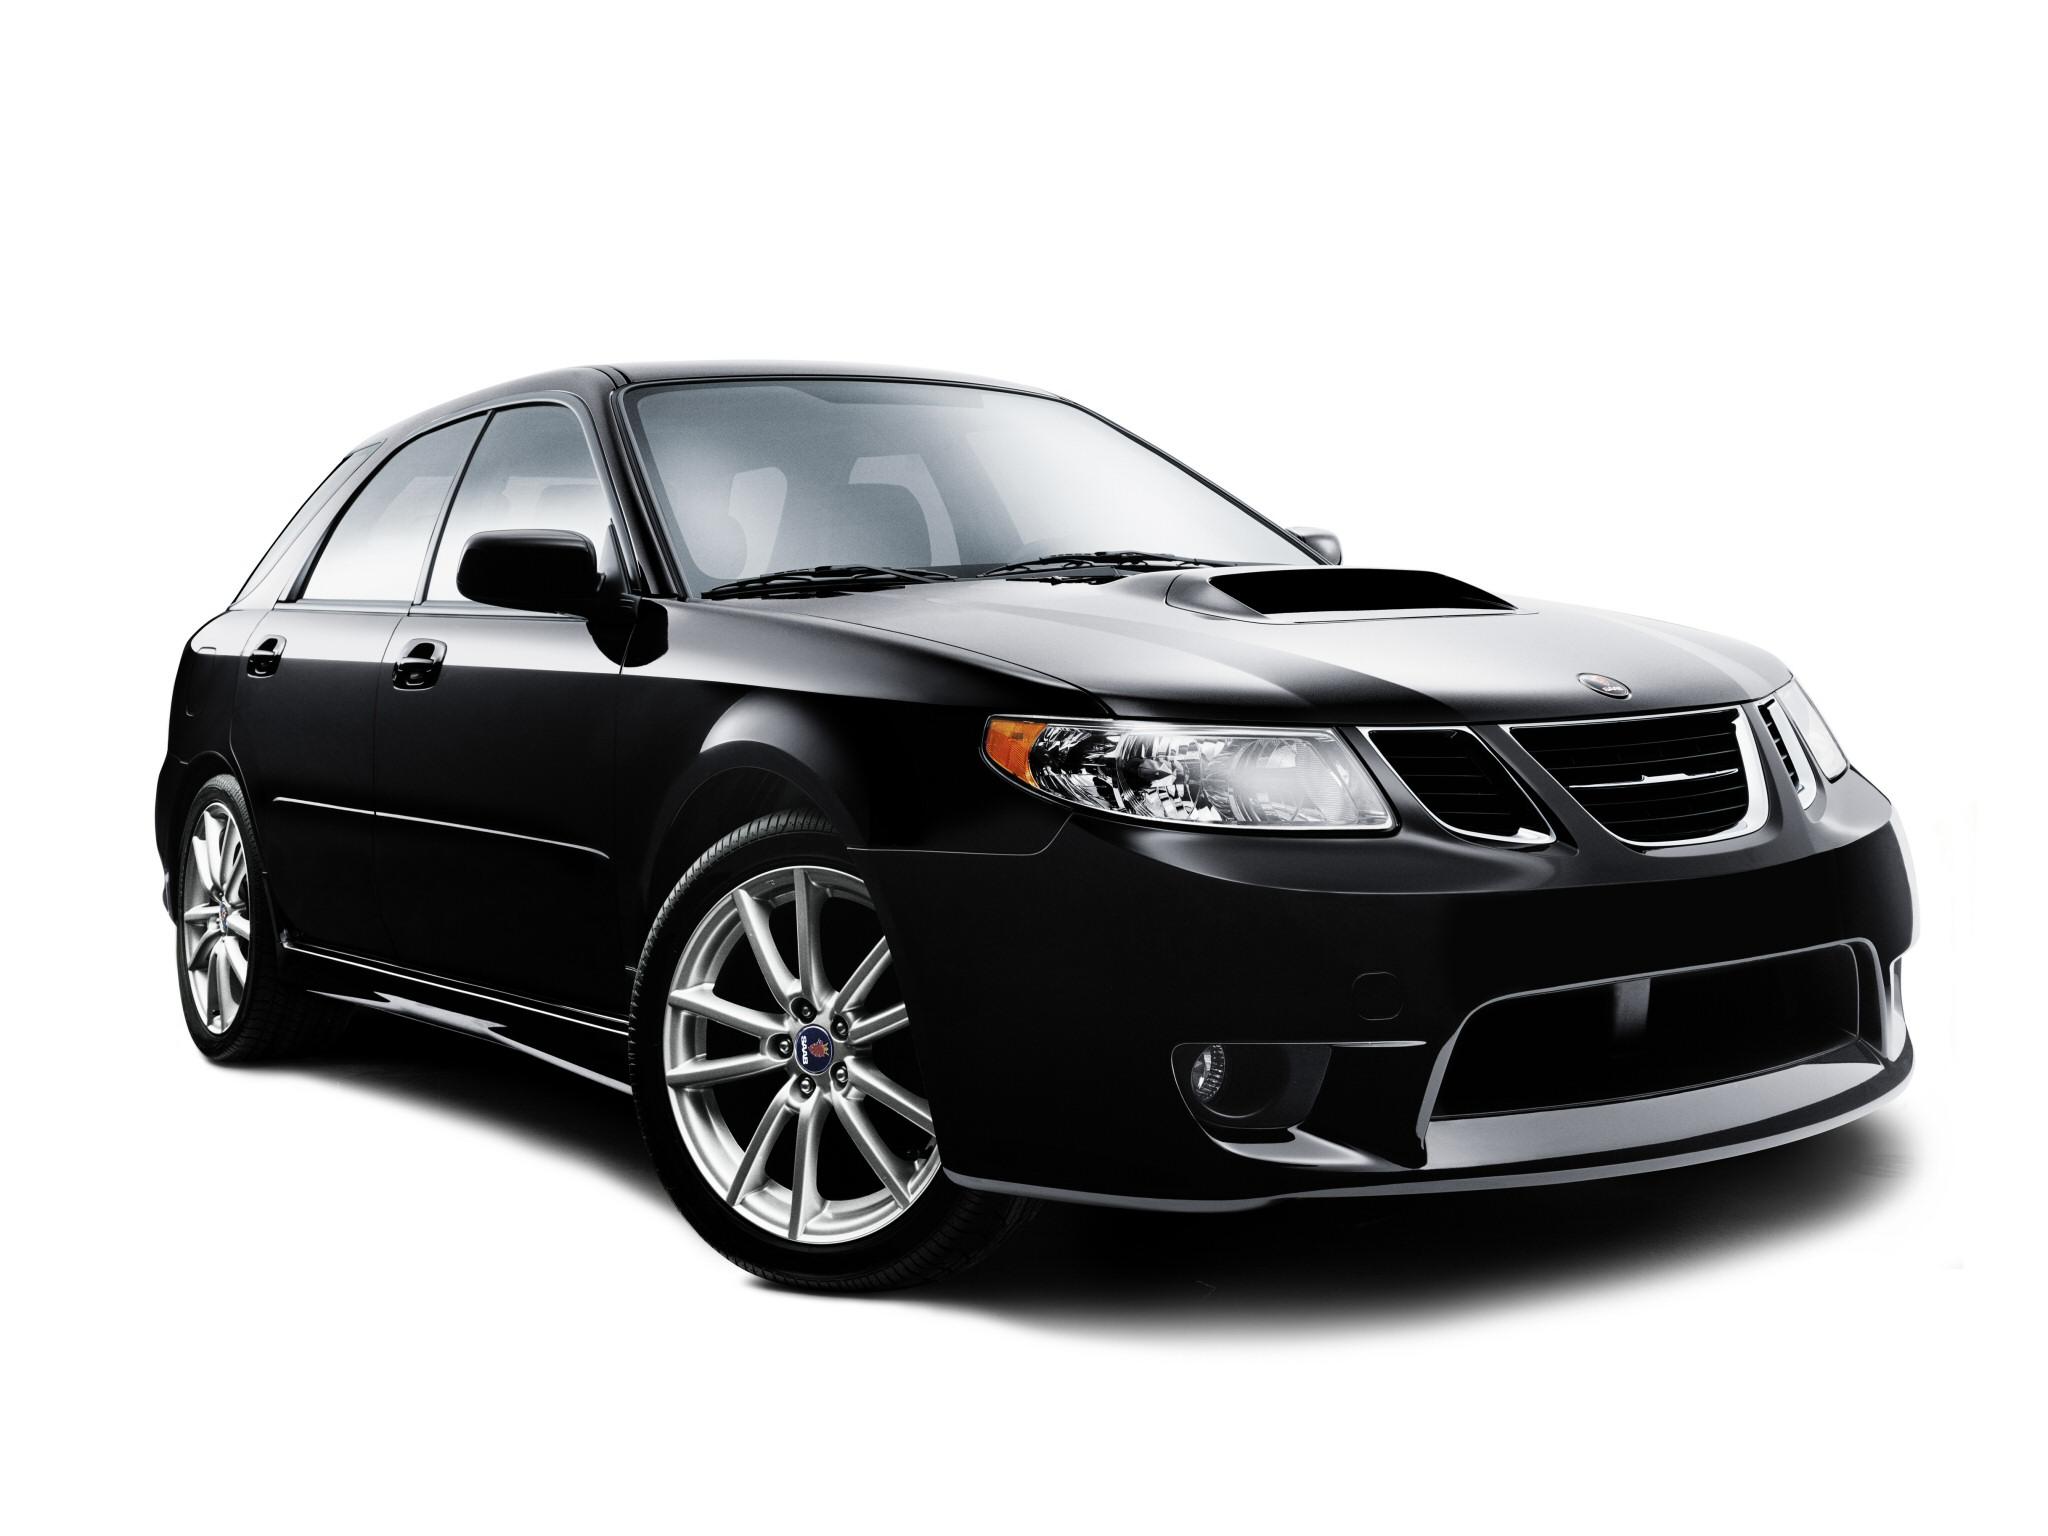 Saab 9 2x Wallpaper HD Photo, Wallpaper And Other Image